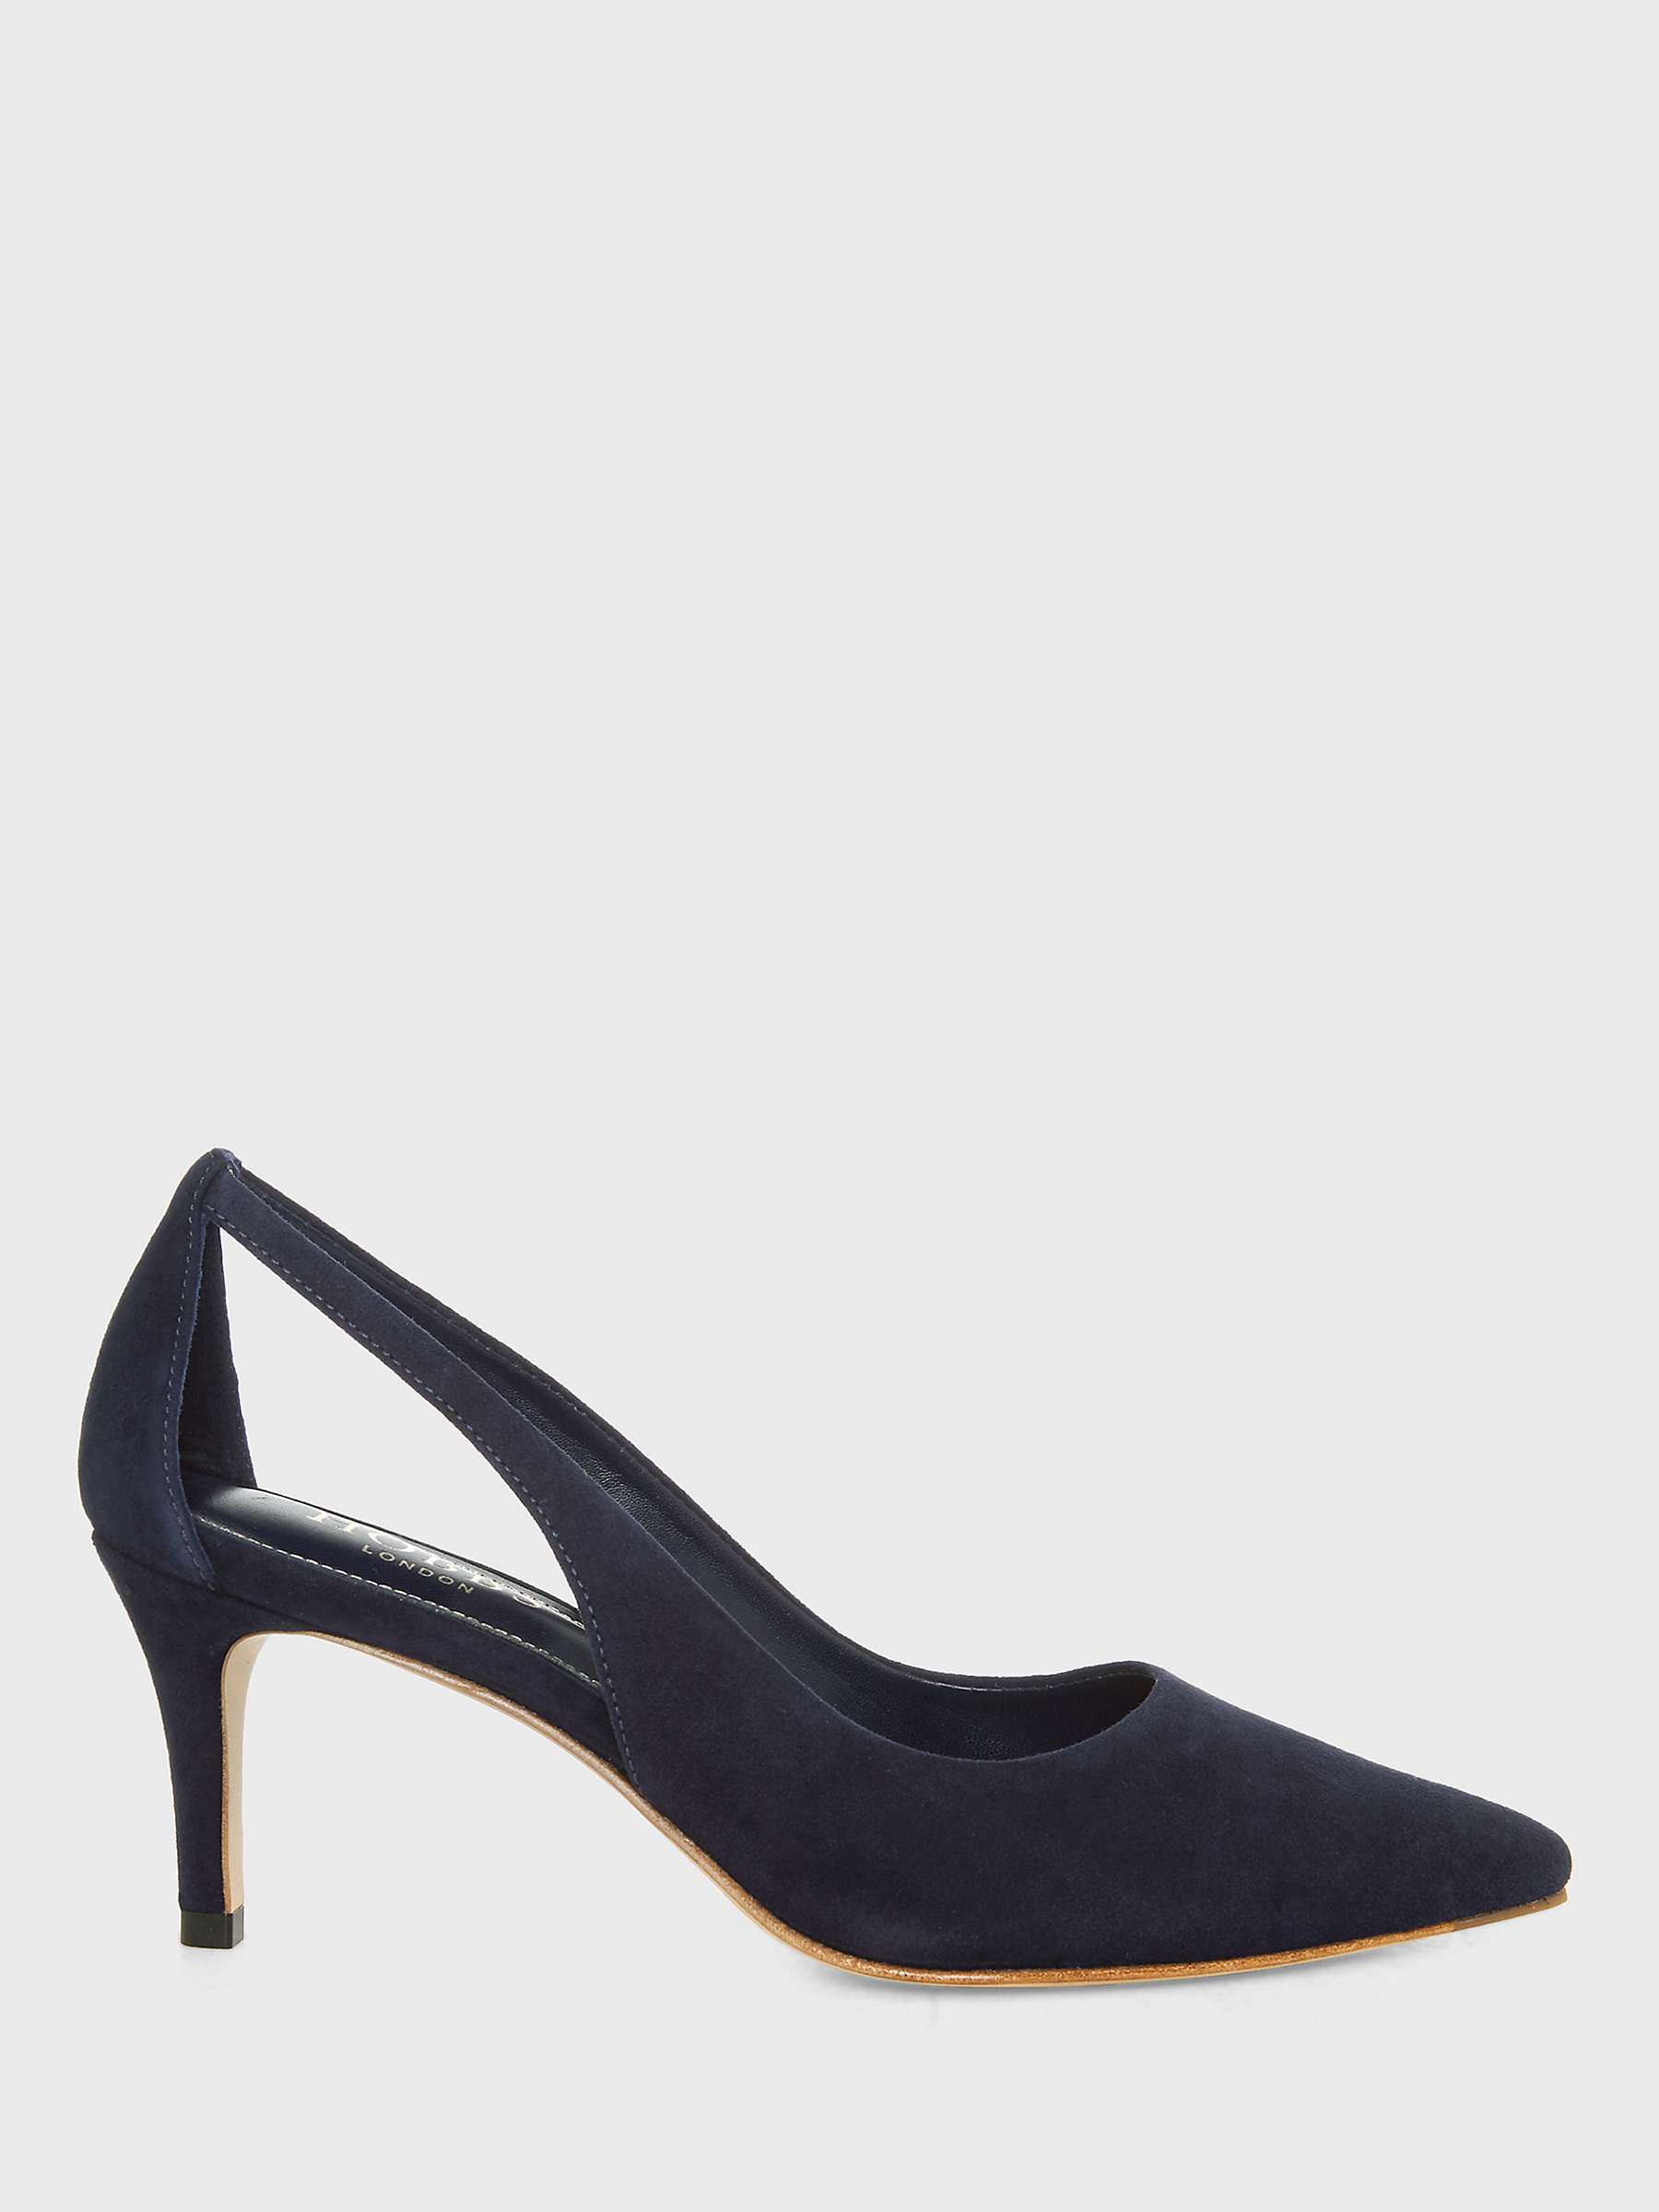 Buy Hobbs Natasha Cut Out Court Shoes Online at johnlewis.com